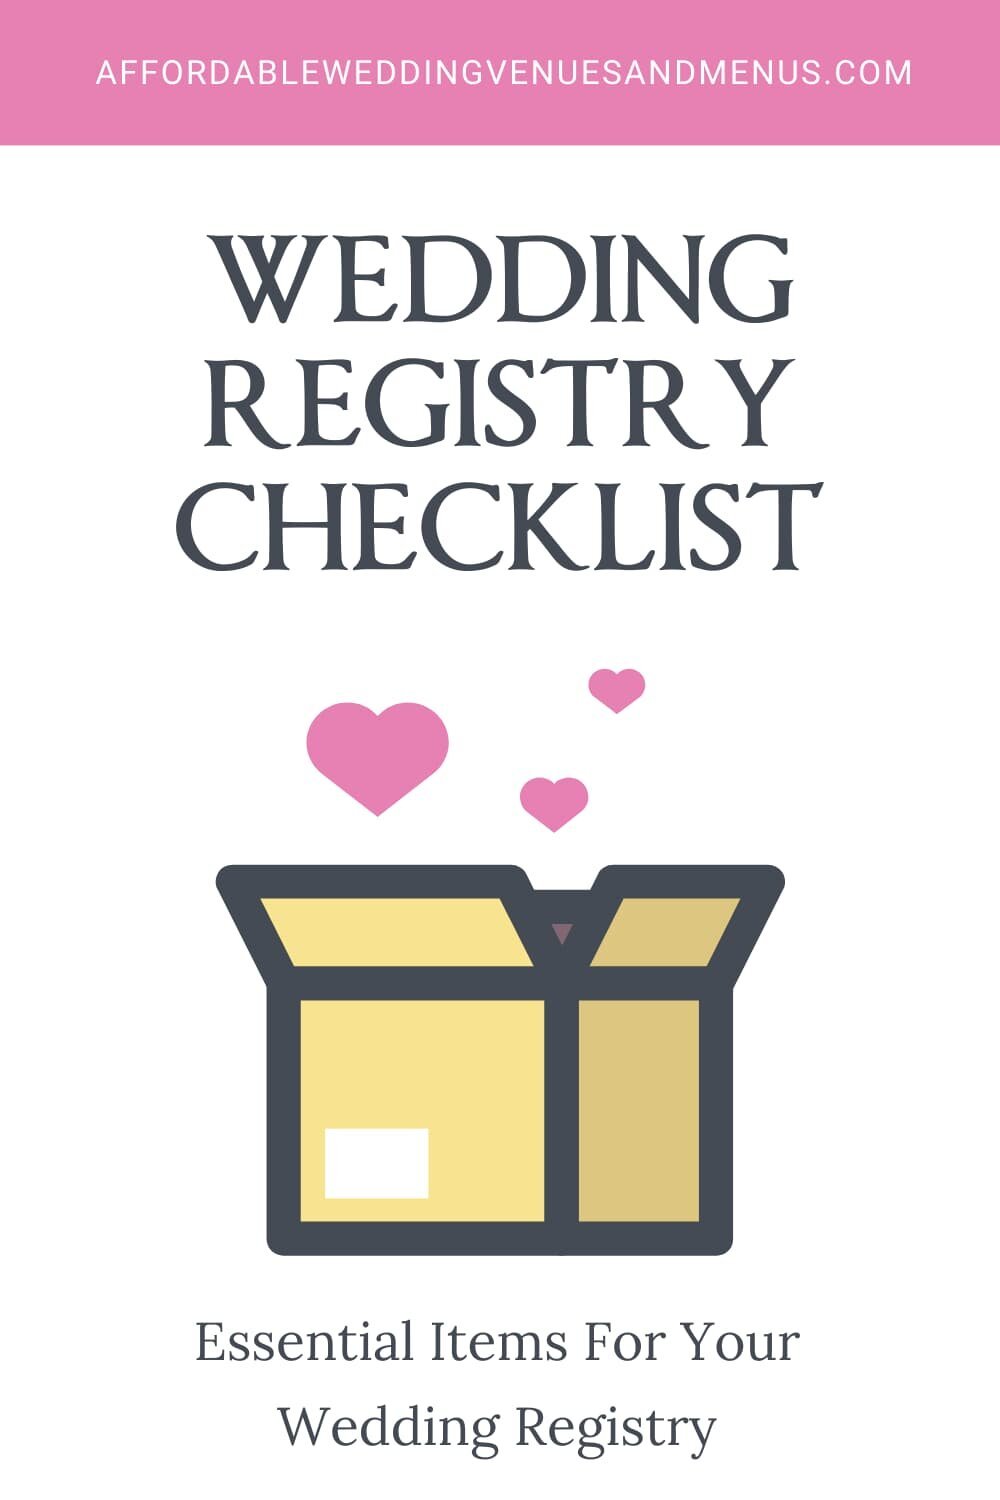 Wedding Registry Ideas: What to Include for Your Newlywed Home